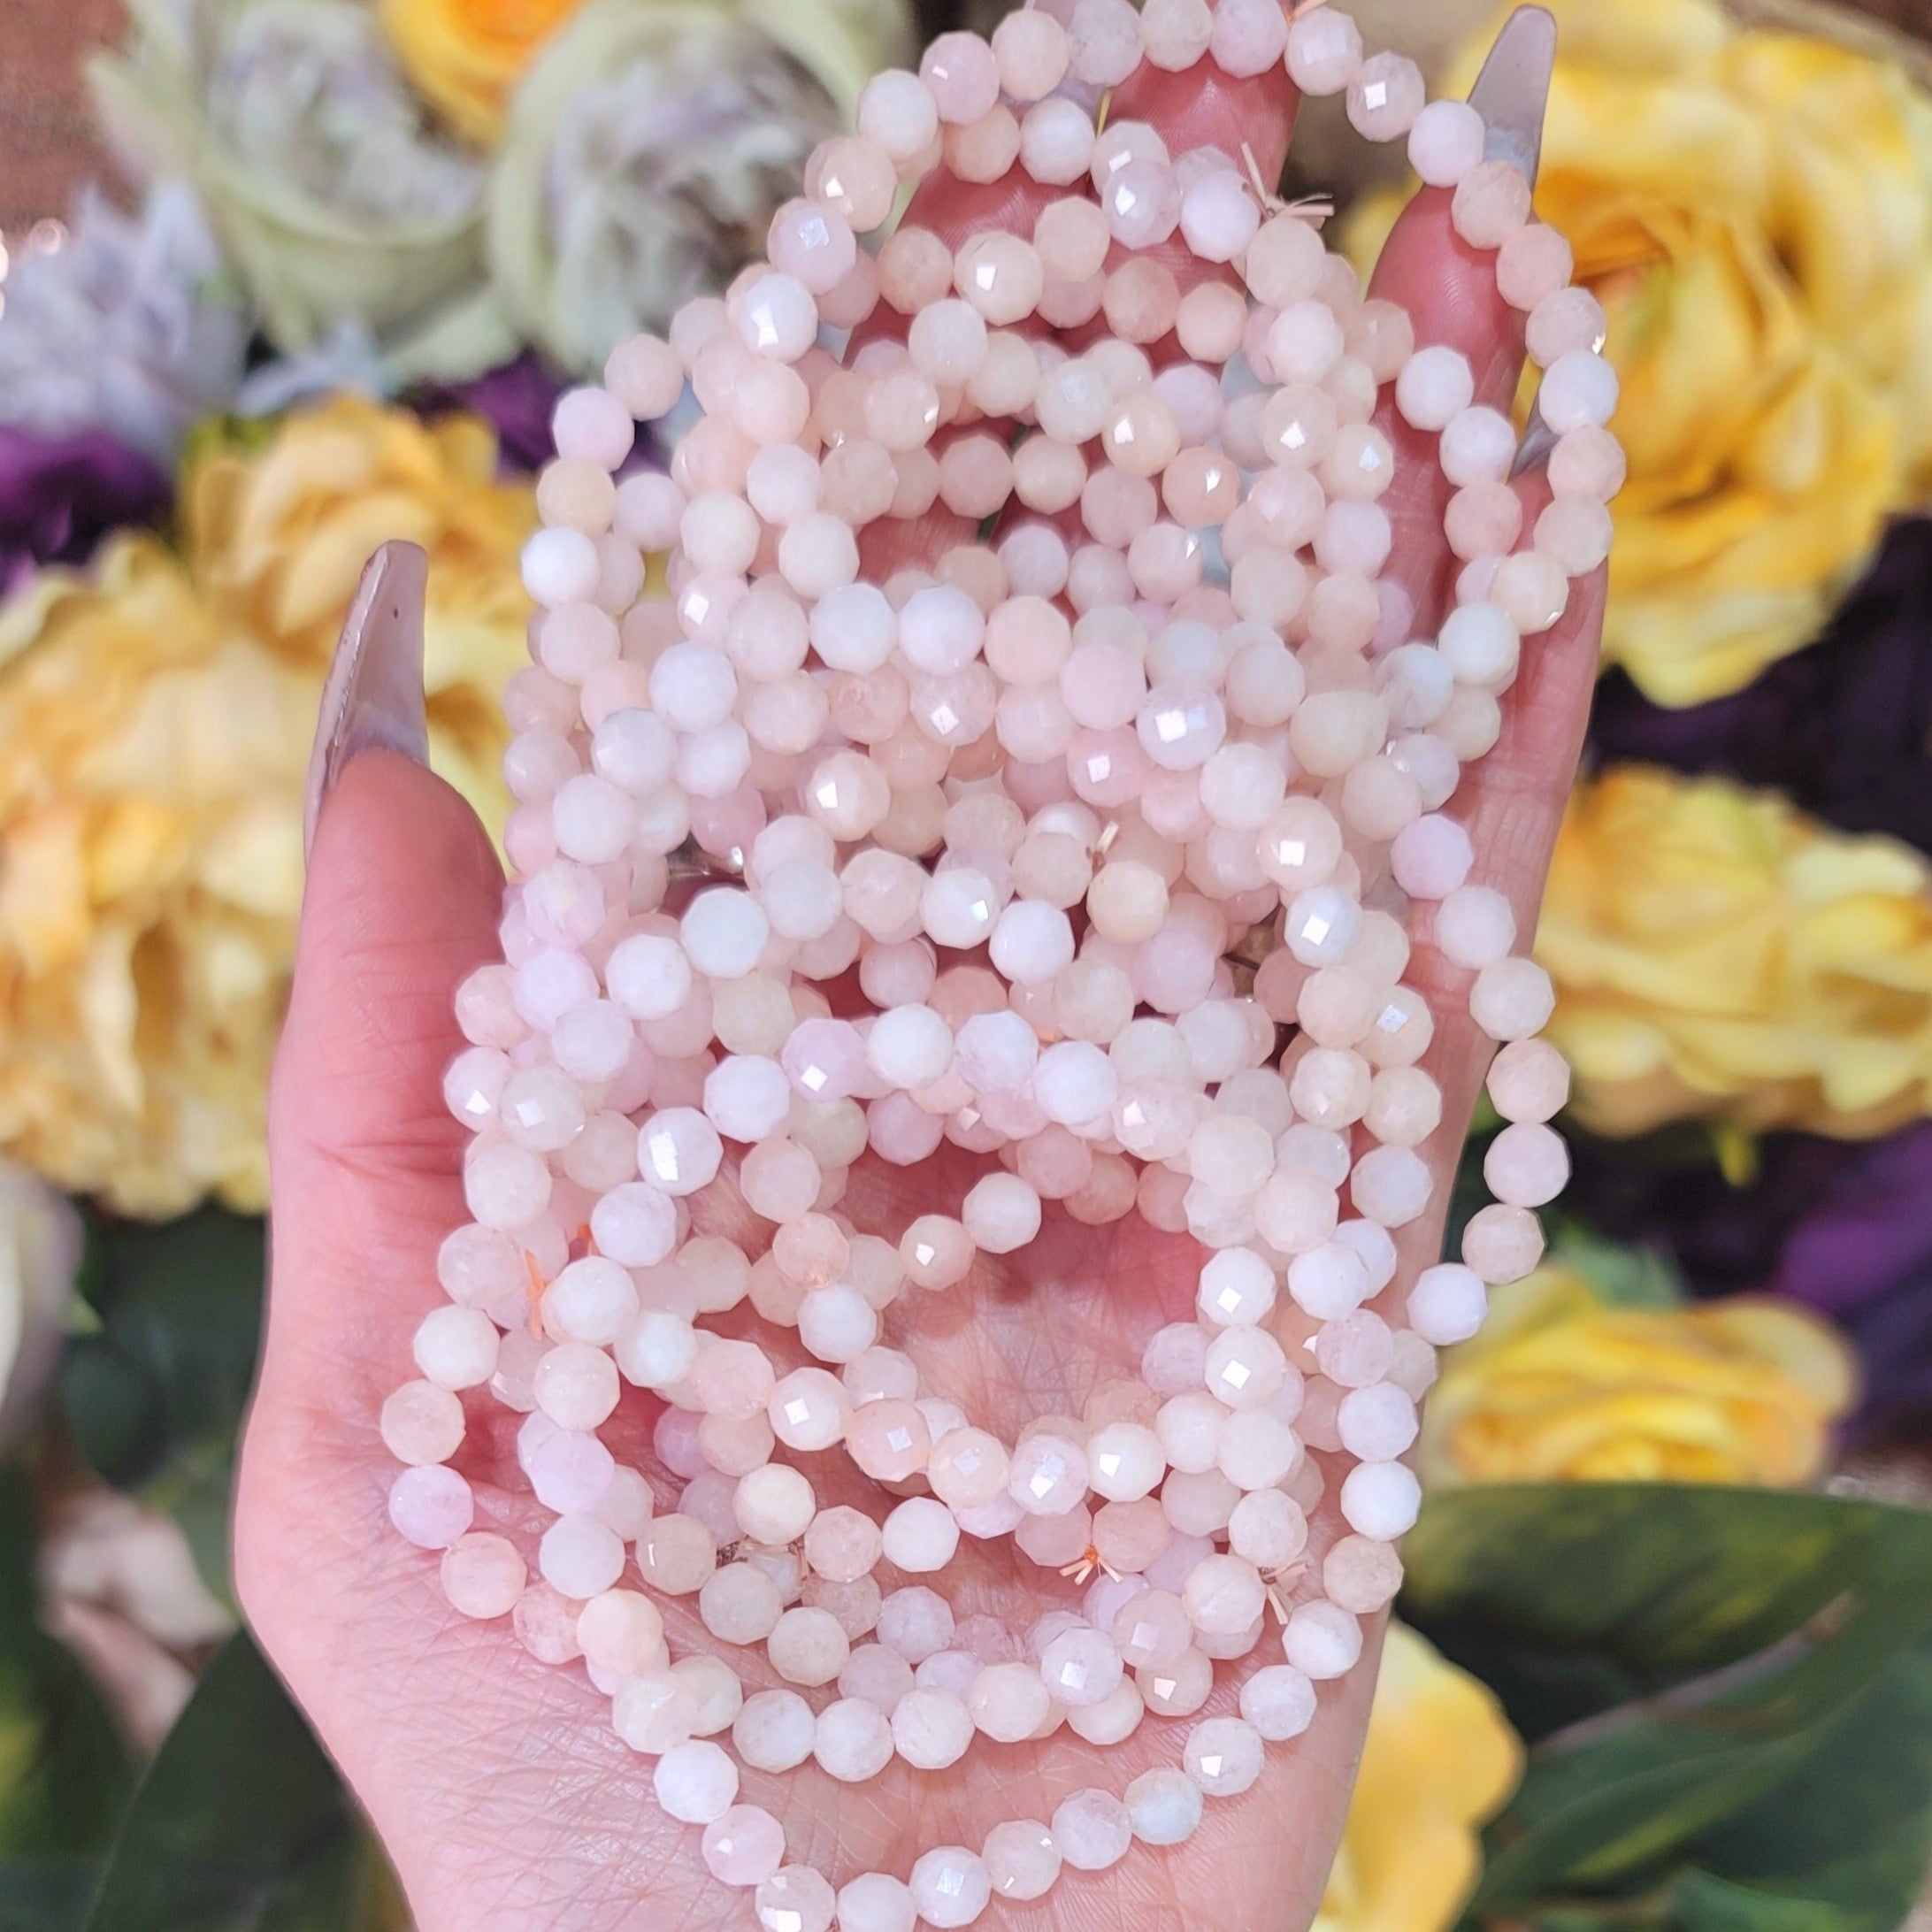 Morganite Faceted Bracelet for Attracting Love, Compassion and Romance